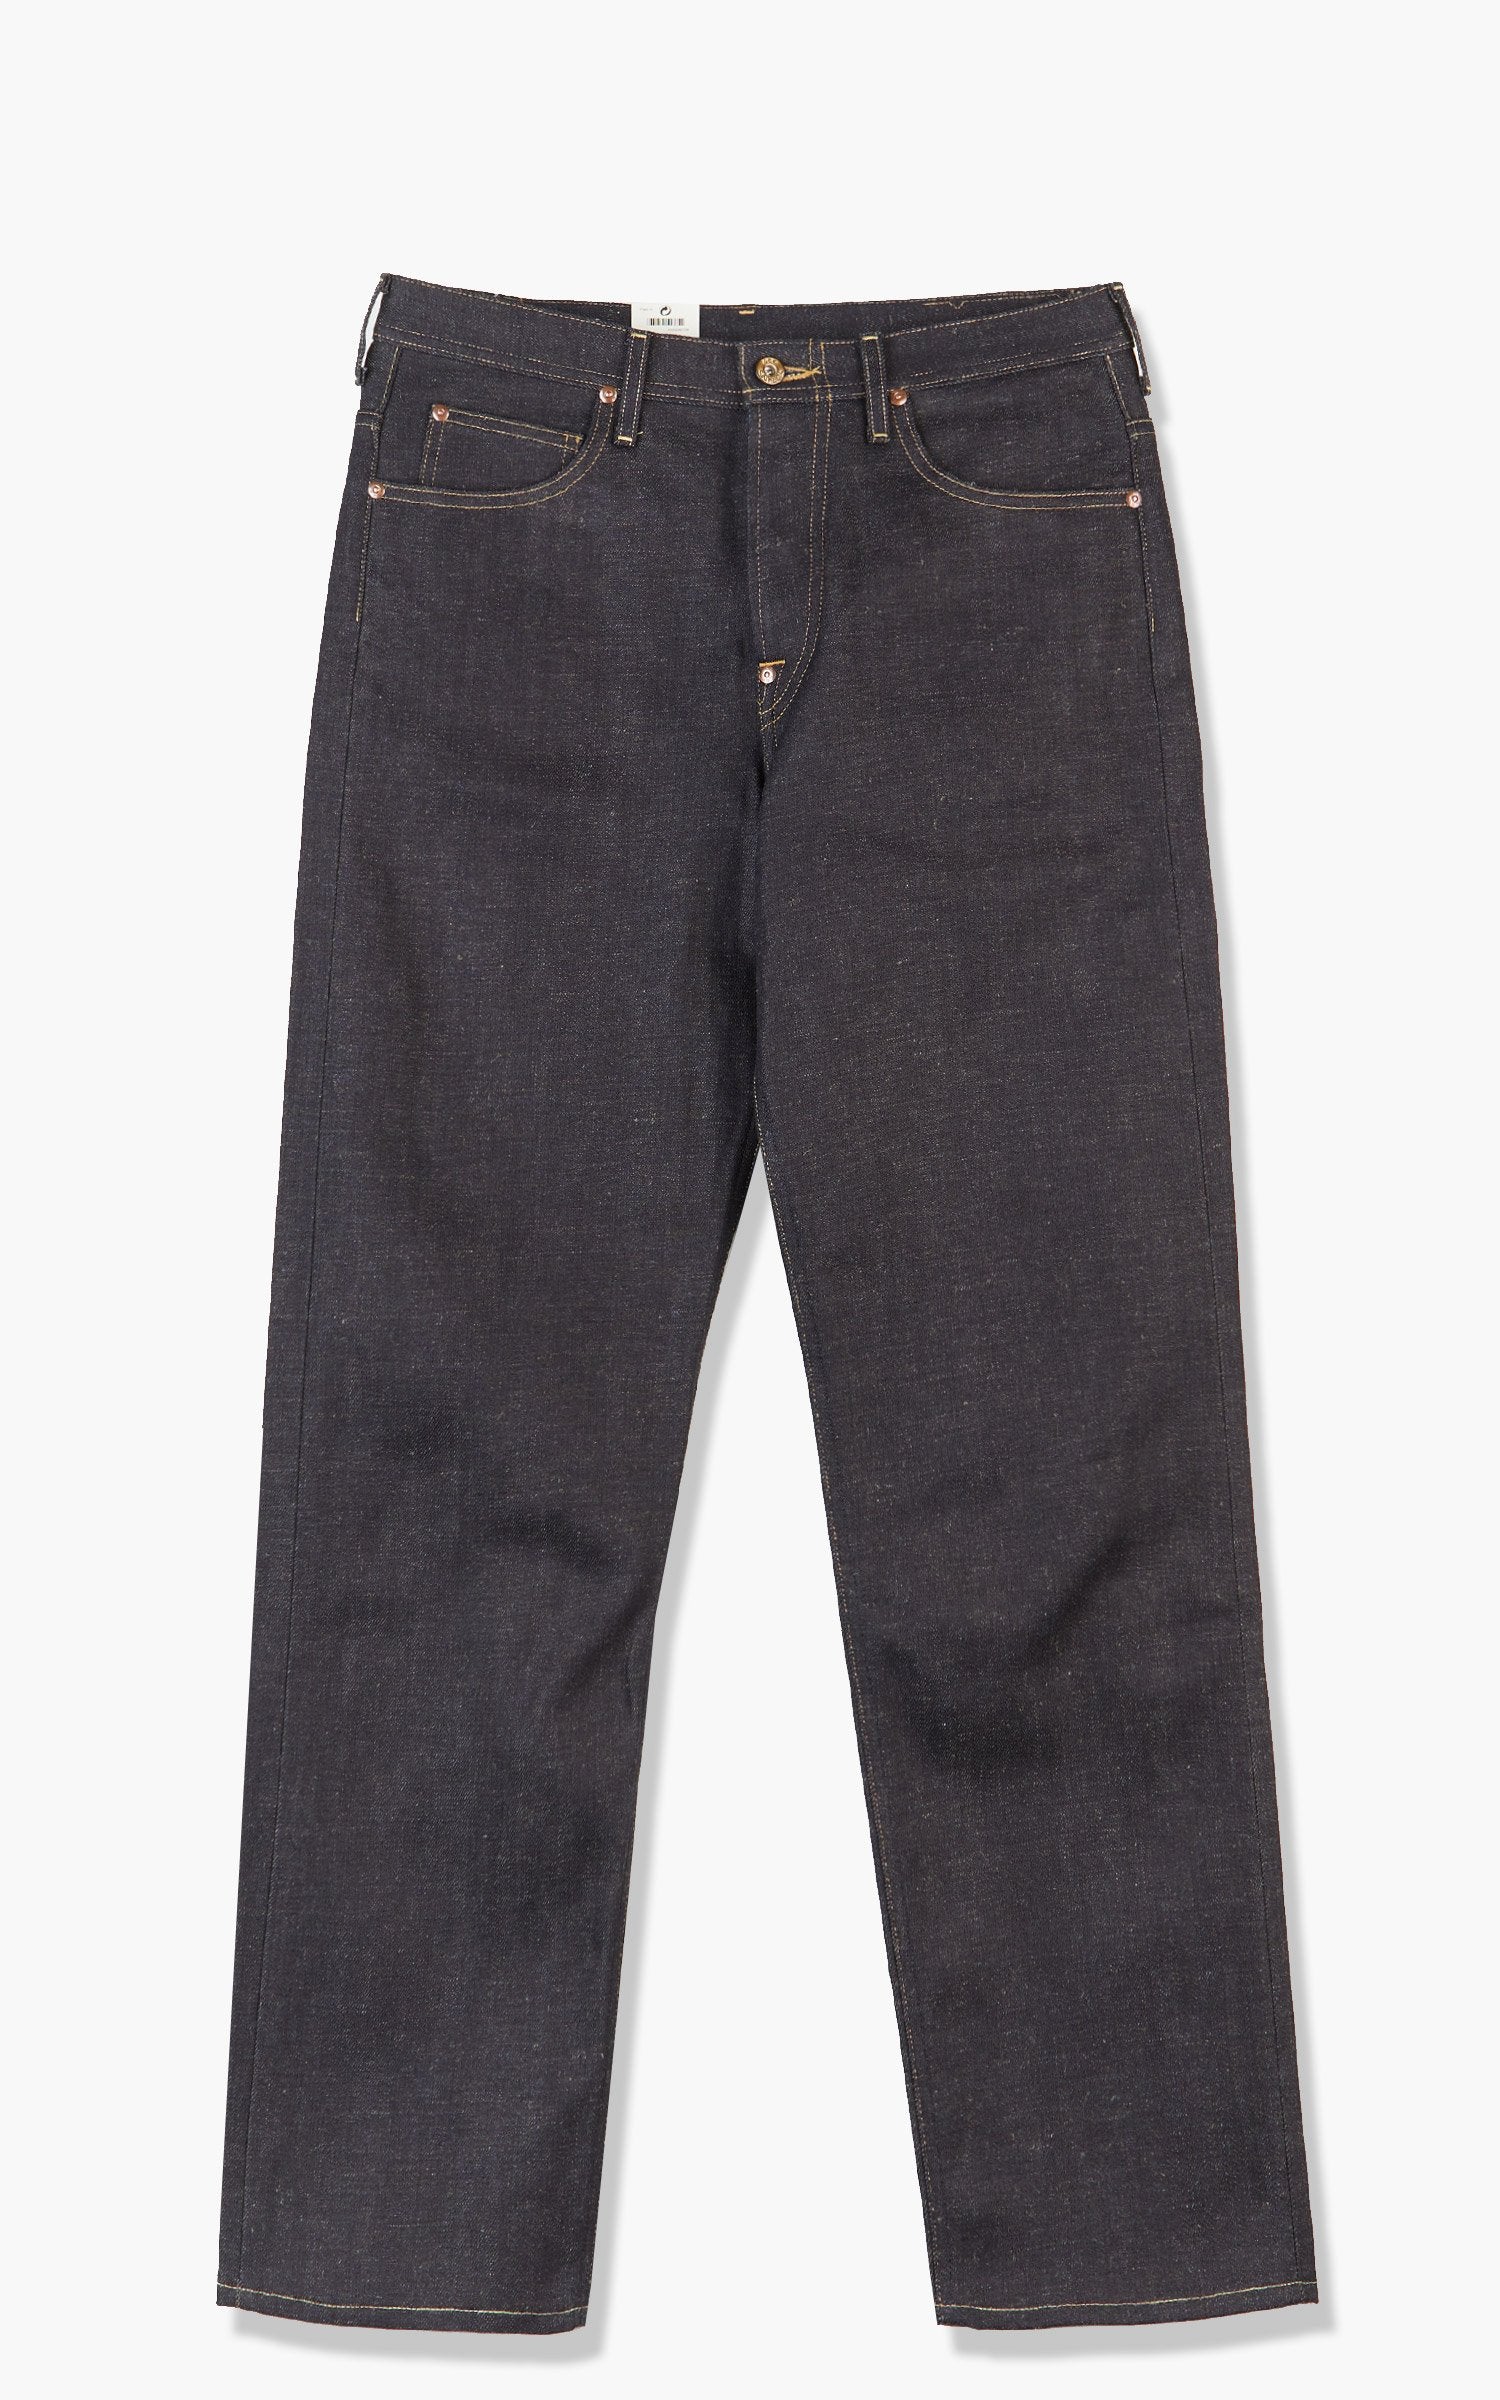 LEE 101 Cinch Back 14 oz Relaxed Fit Selvage Jean